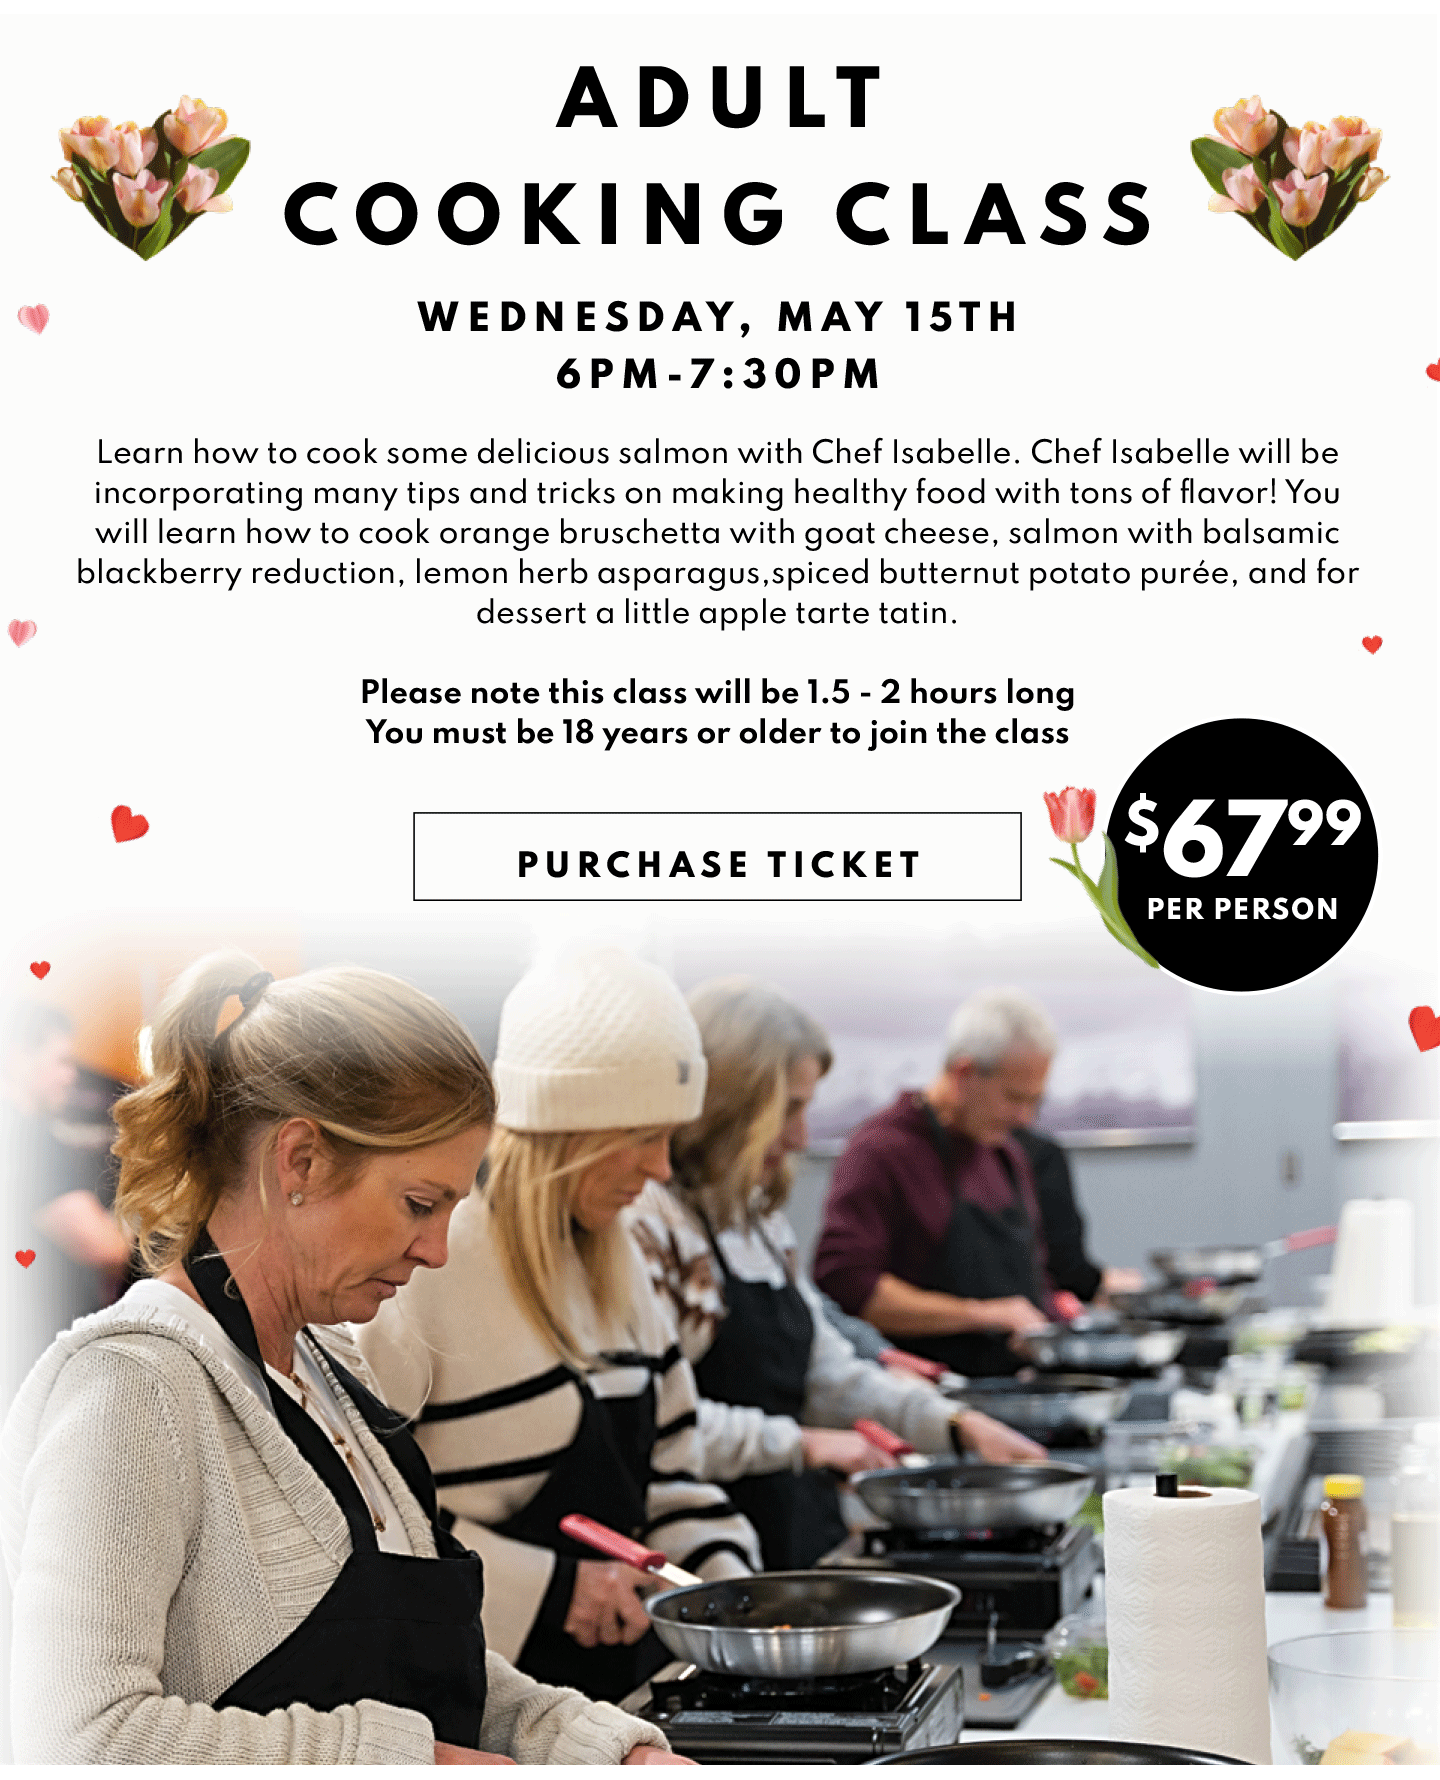 Adult Cooking Class, Wed May 15th 6pm-7:30pm. $67.99 per person